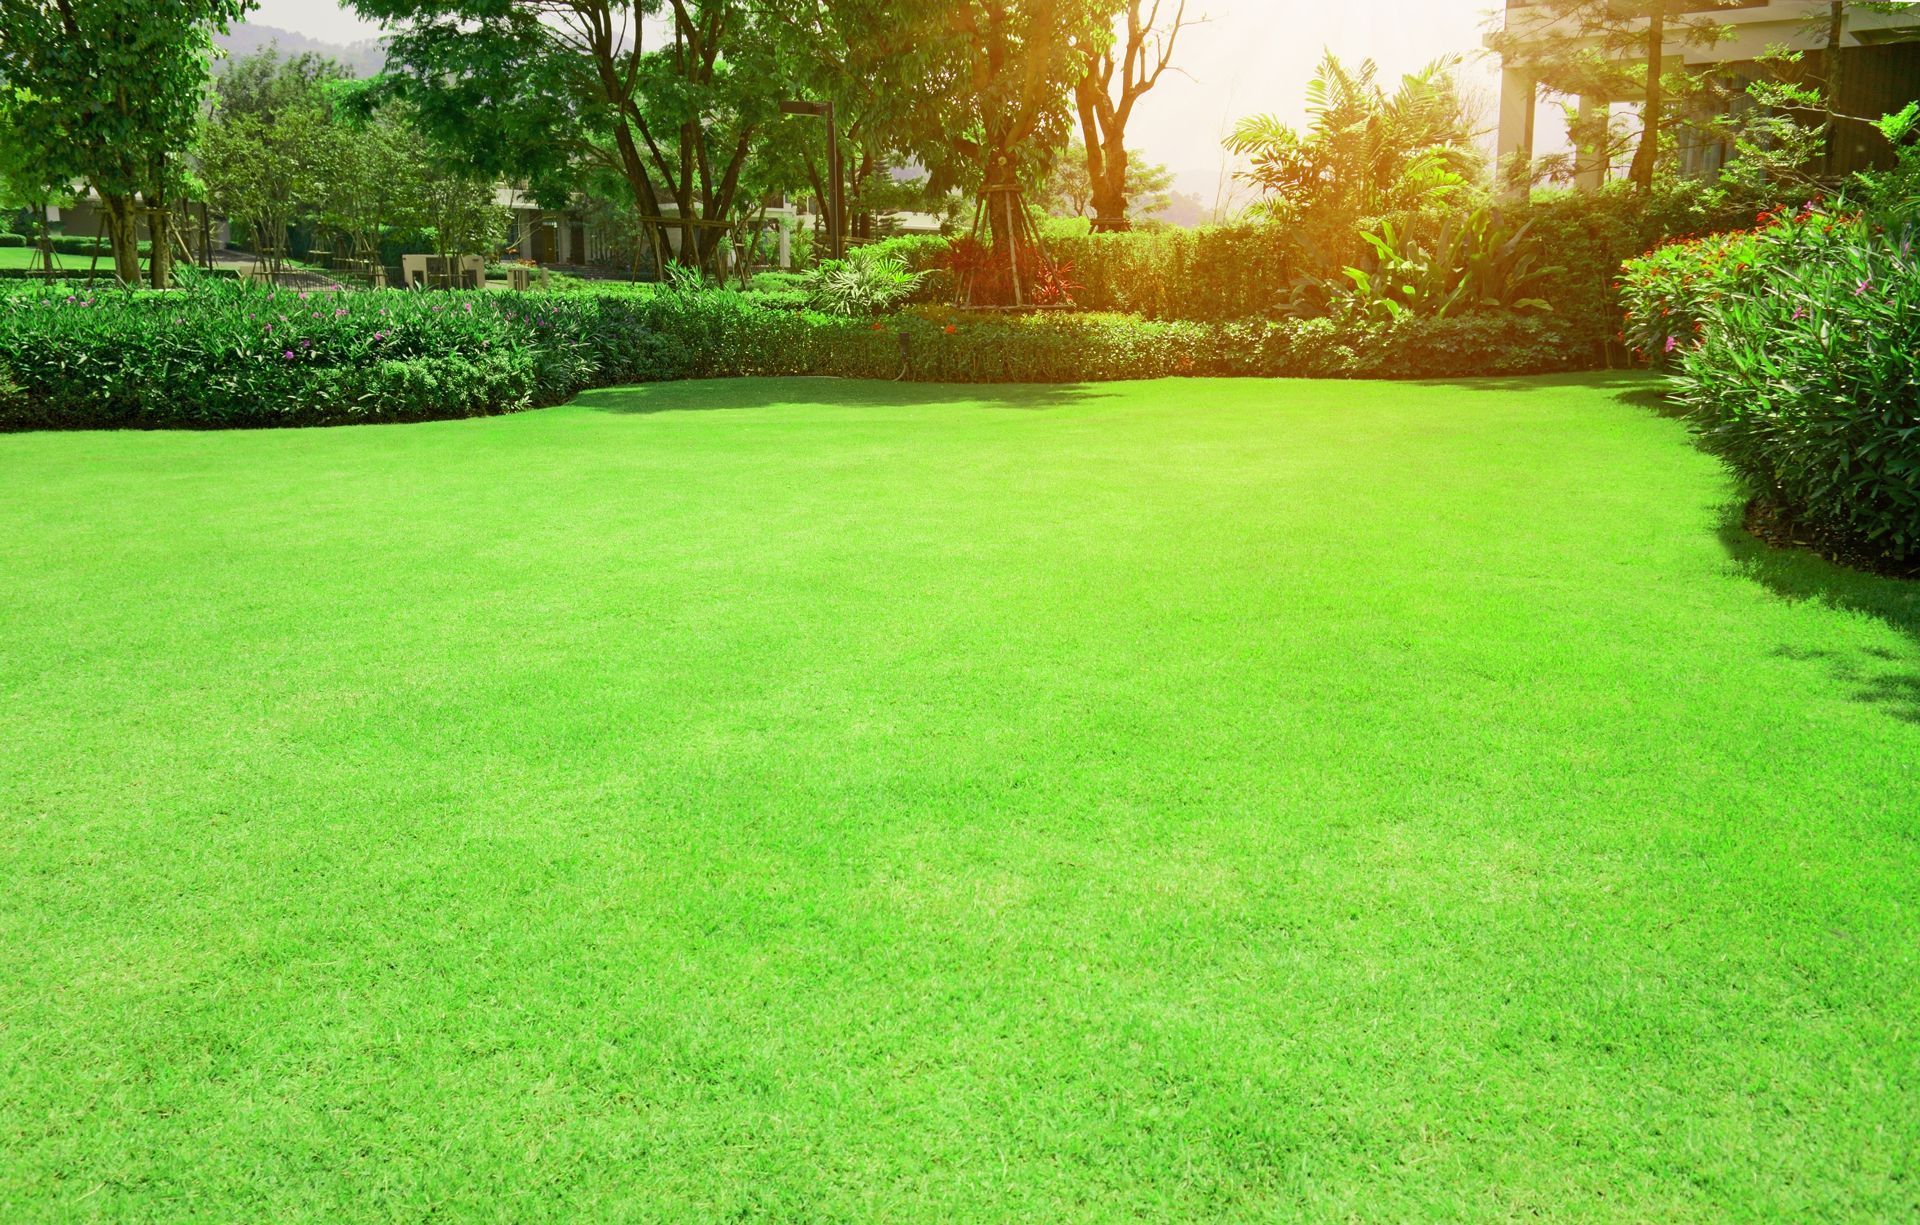 a lush green lawn in a park with trees and bushes